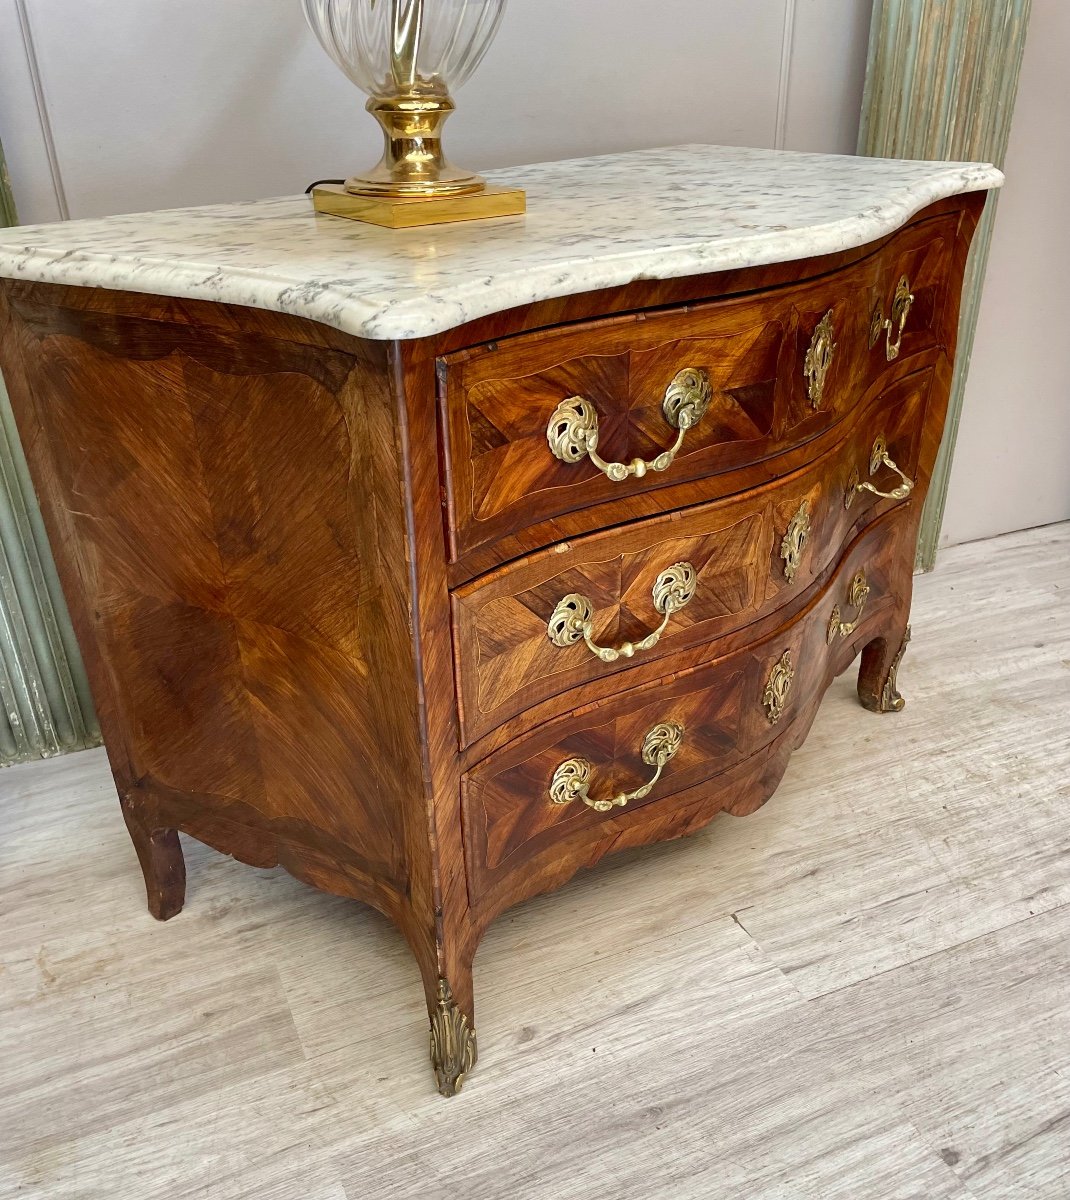 Mazarine Chest Of Drawers In Marquetry From The 18th Century-photo-1